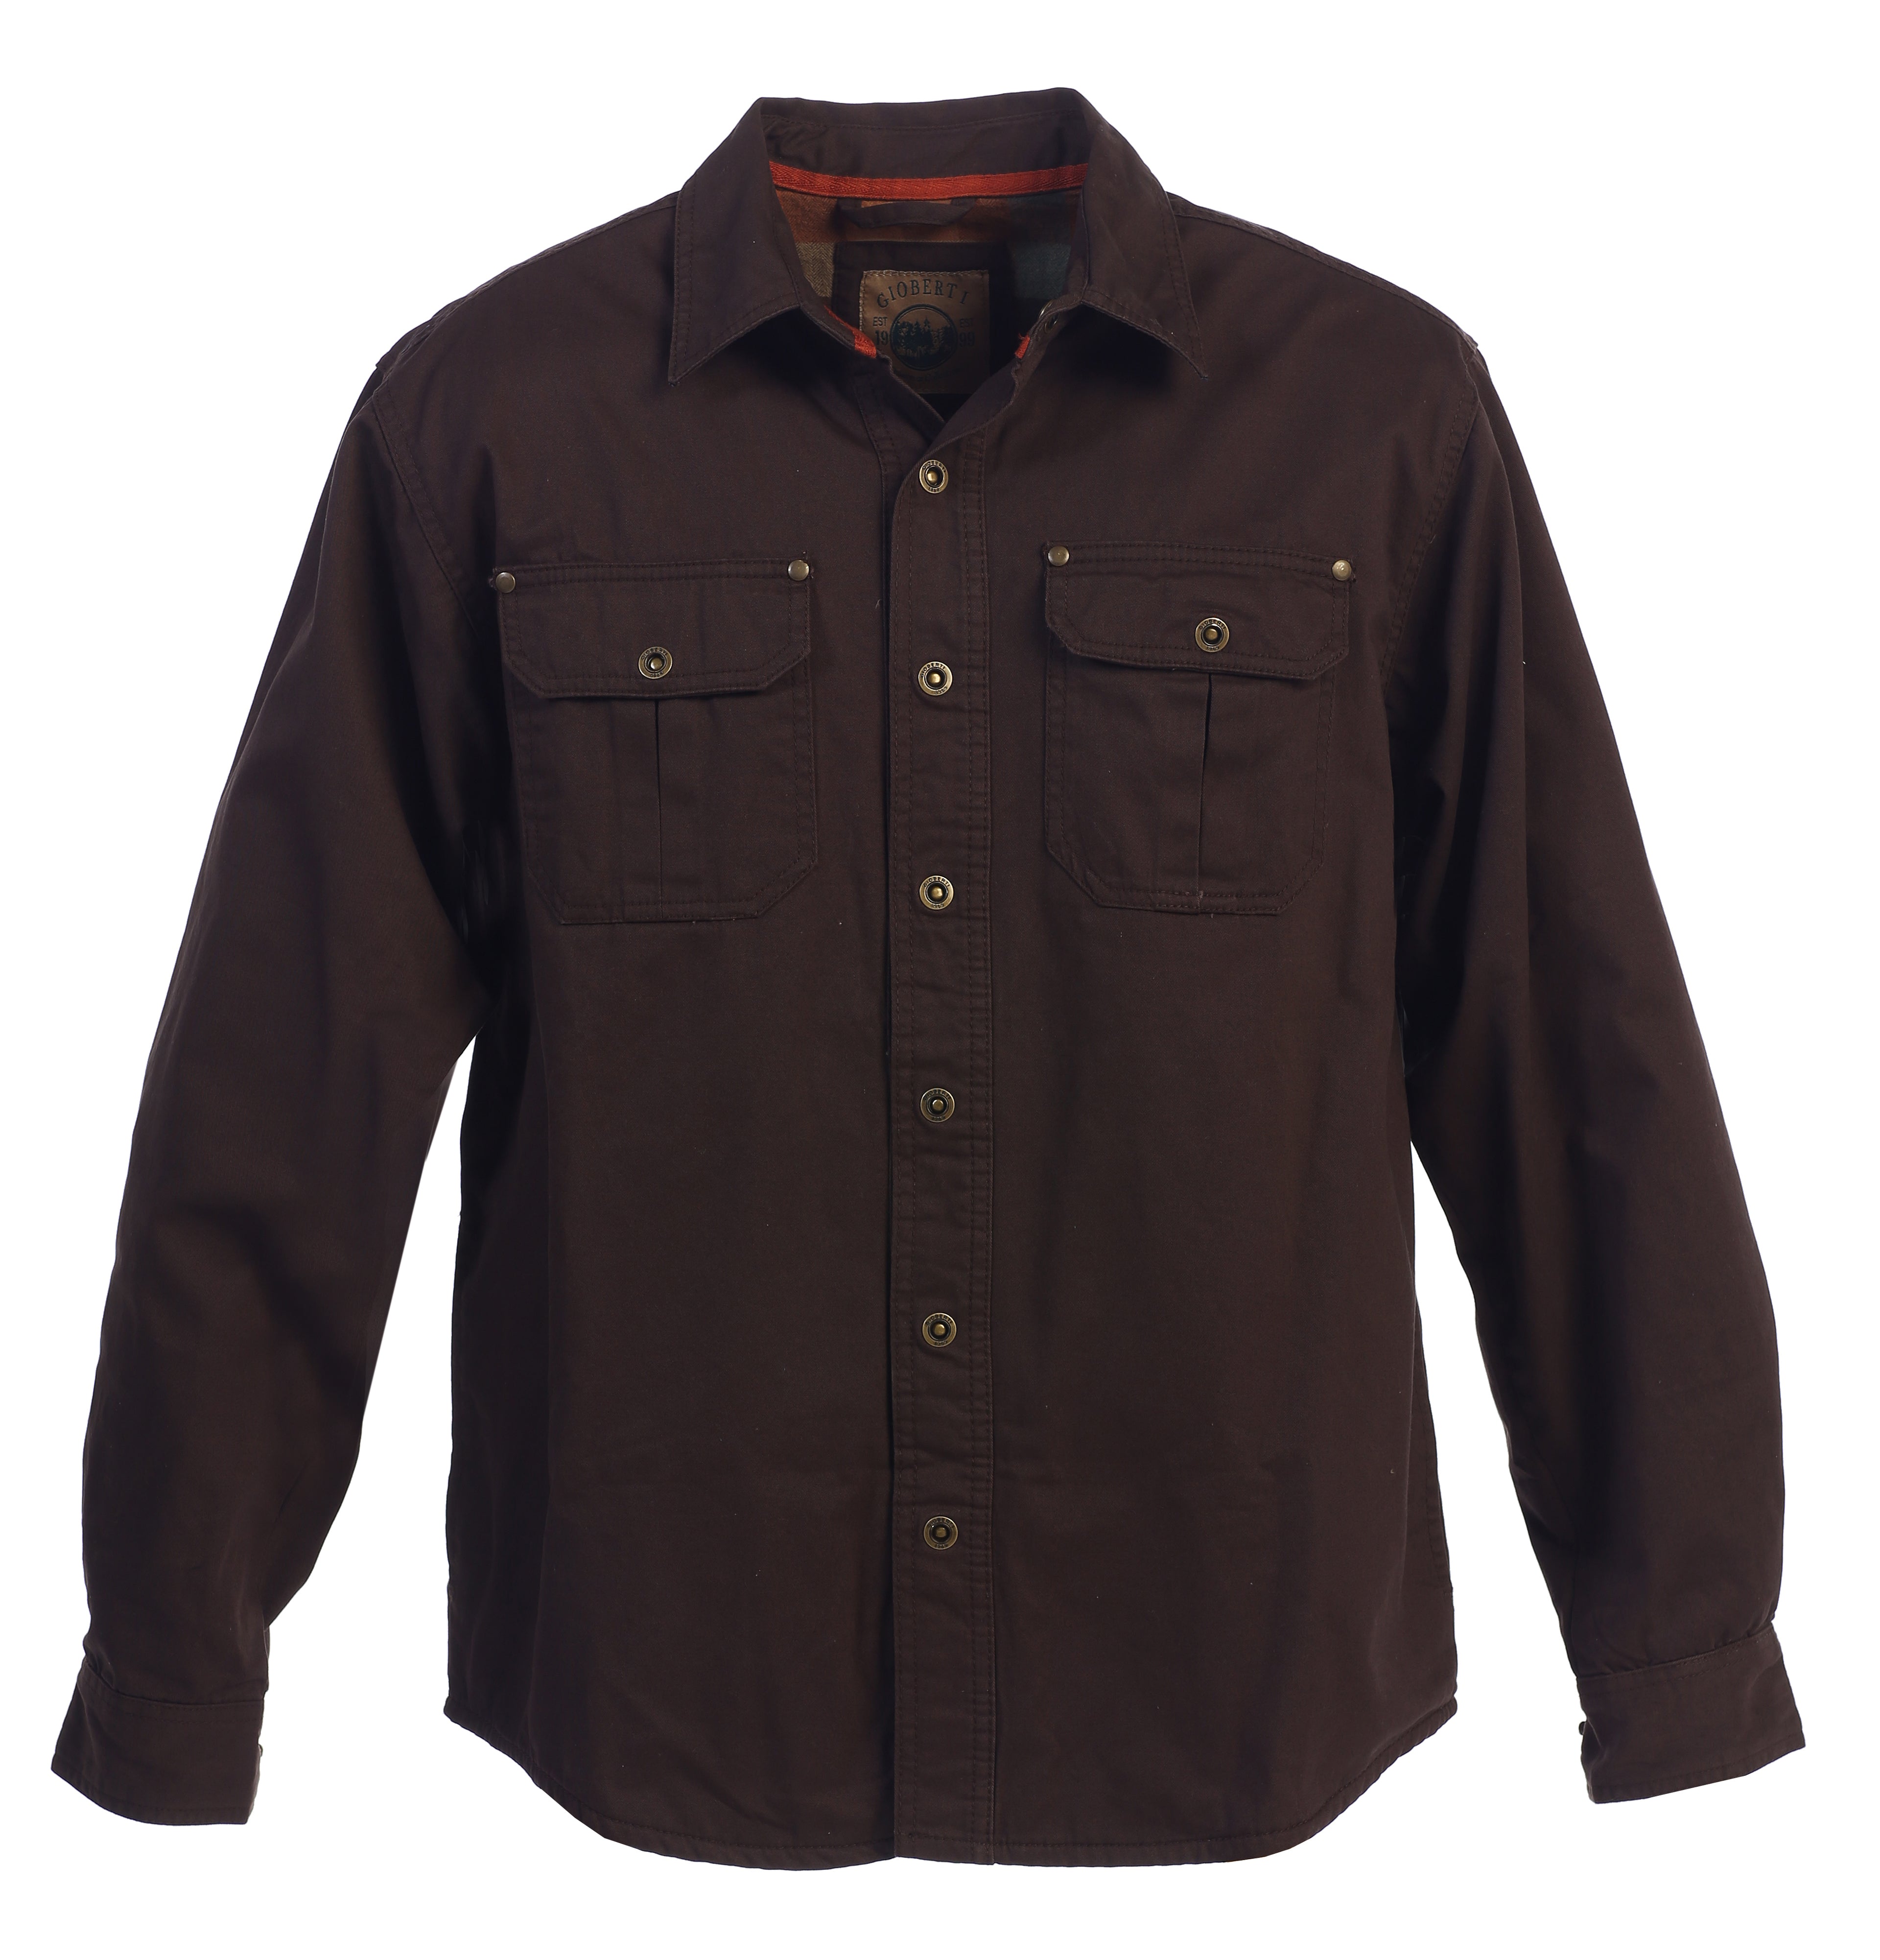 title:Gioberti Men's Brown Cotton Brushed and Soft Twill Shirt Jacket with Flannel Lining;color:Brown